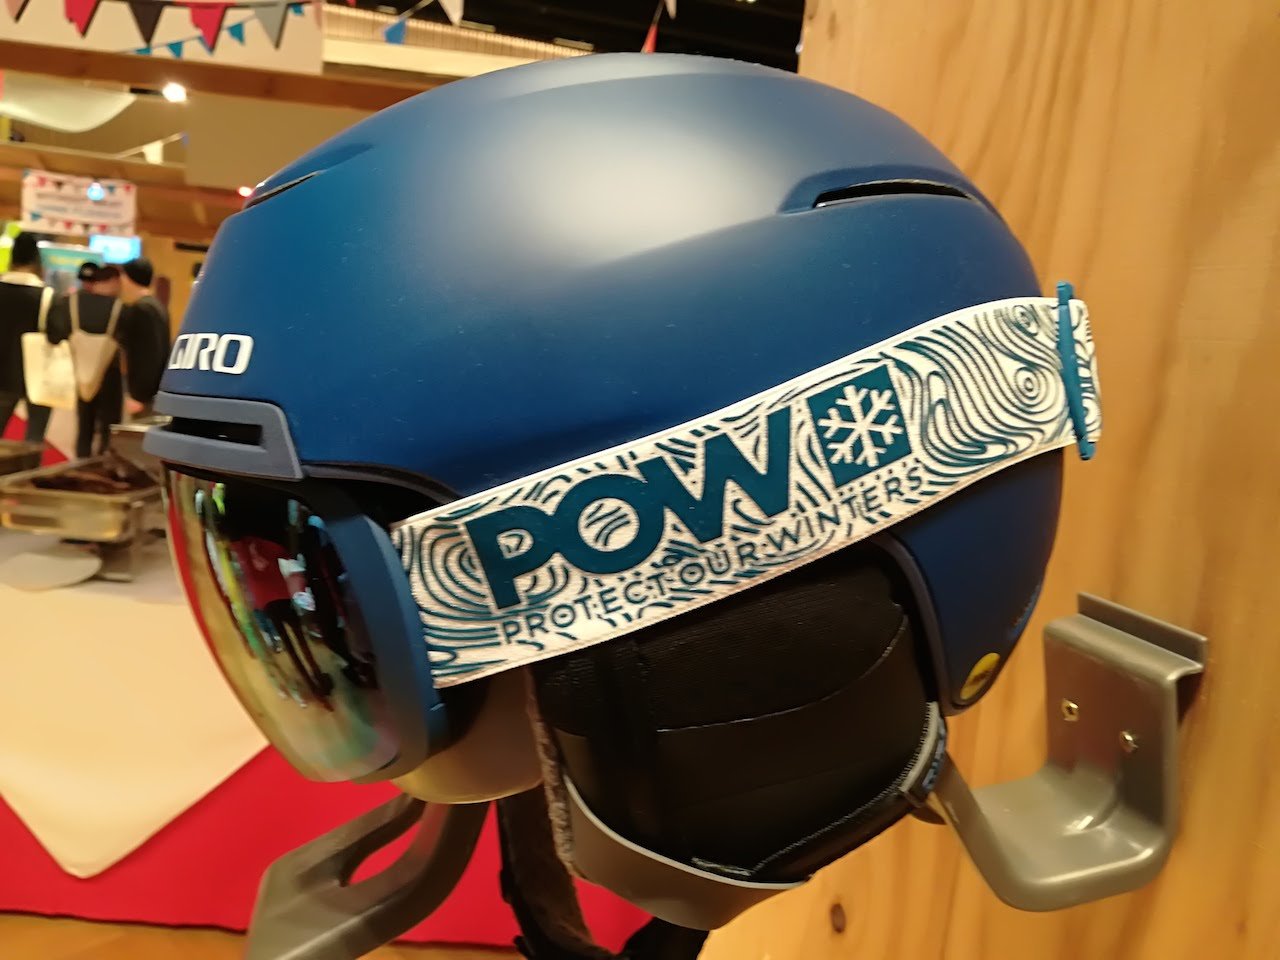 Giro have a POW collaboration on the Contact goggle and Jackson